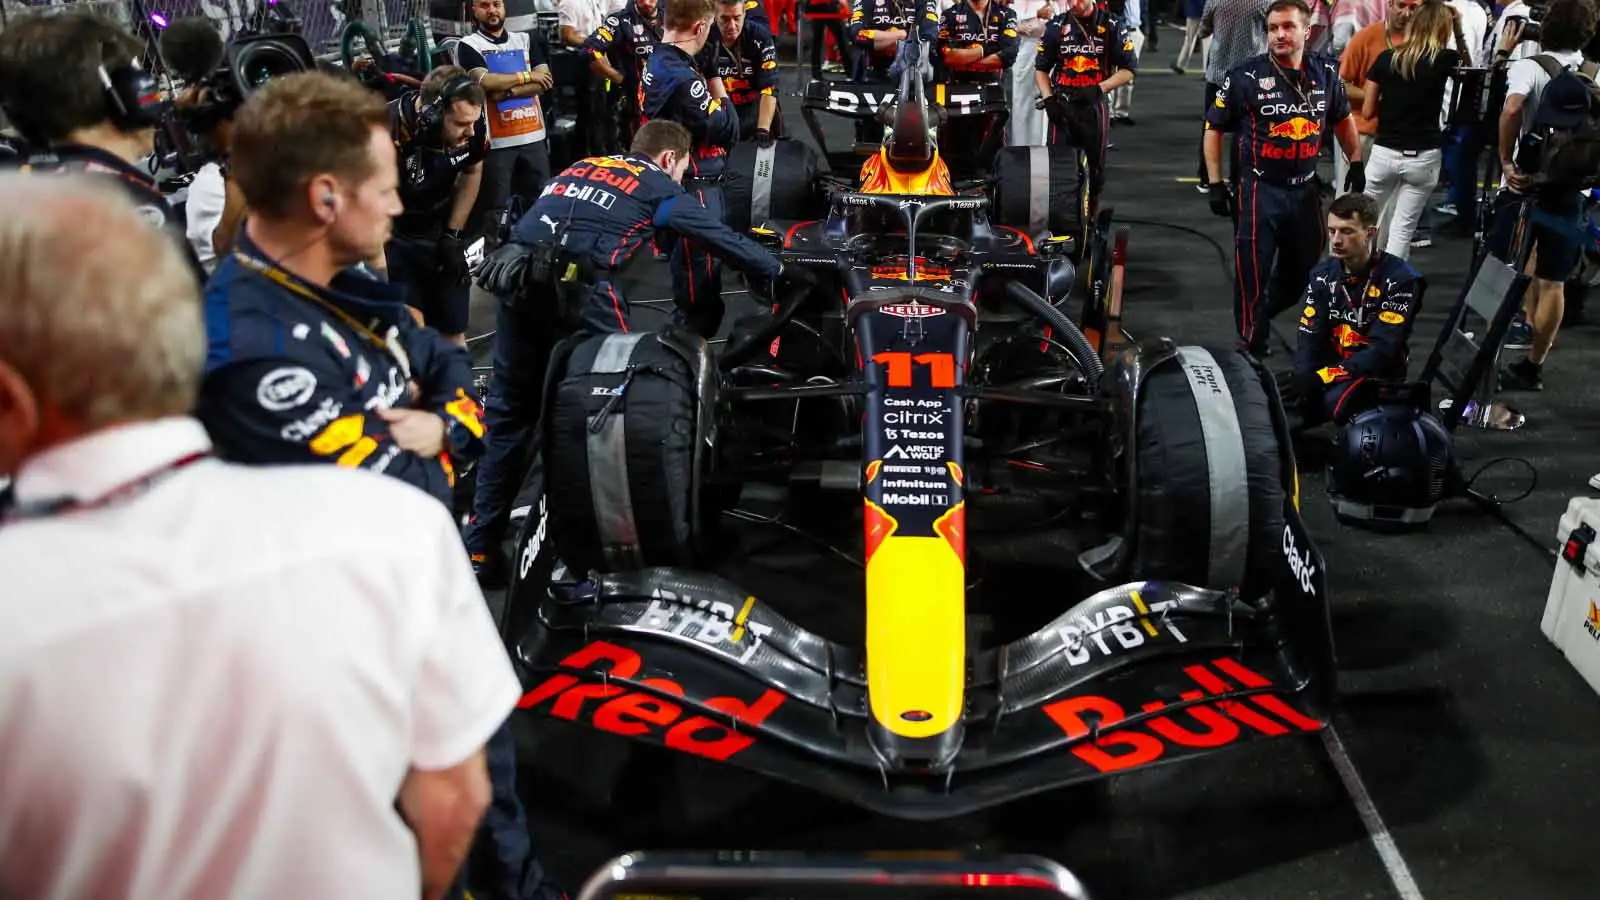 Red Bull driver Sergio Perez on the grid. Jeddah March 2022.